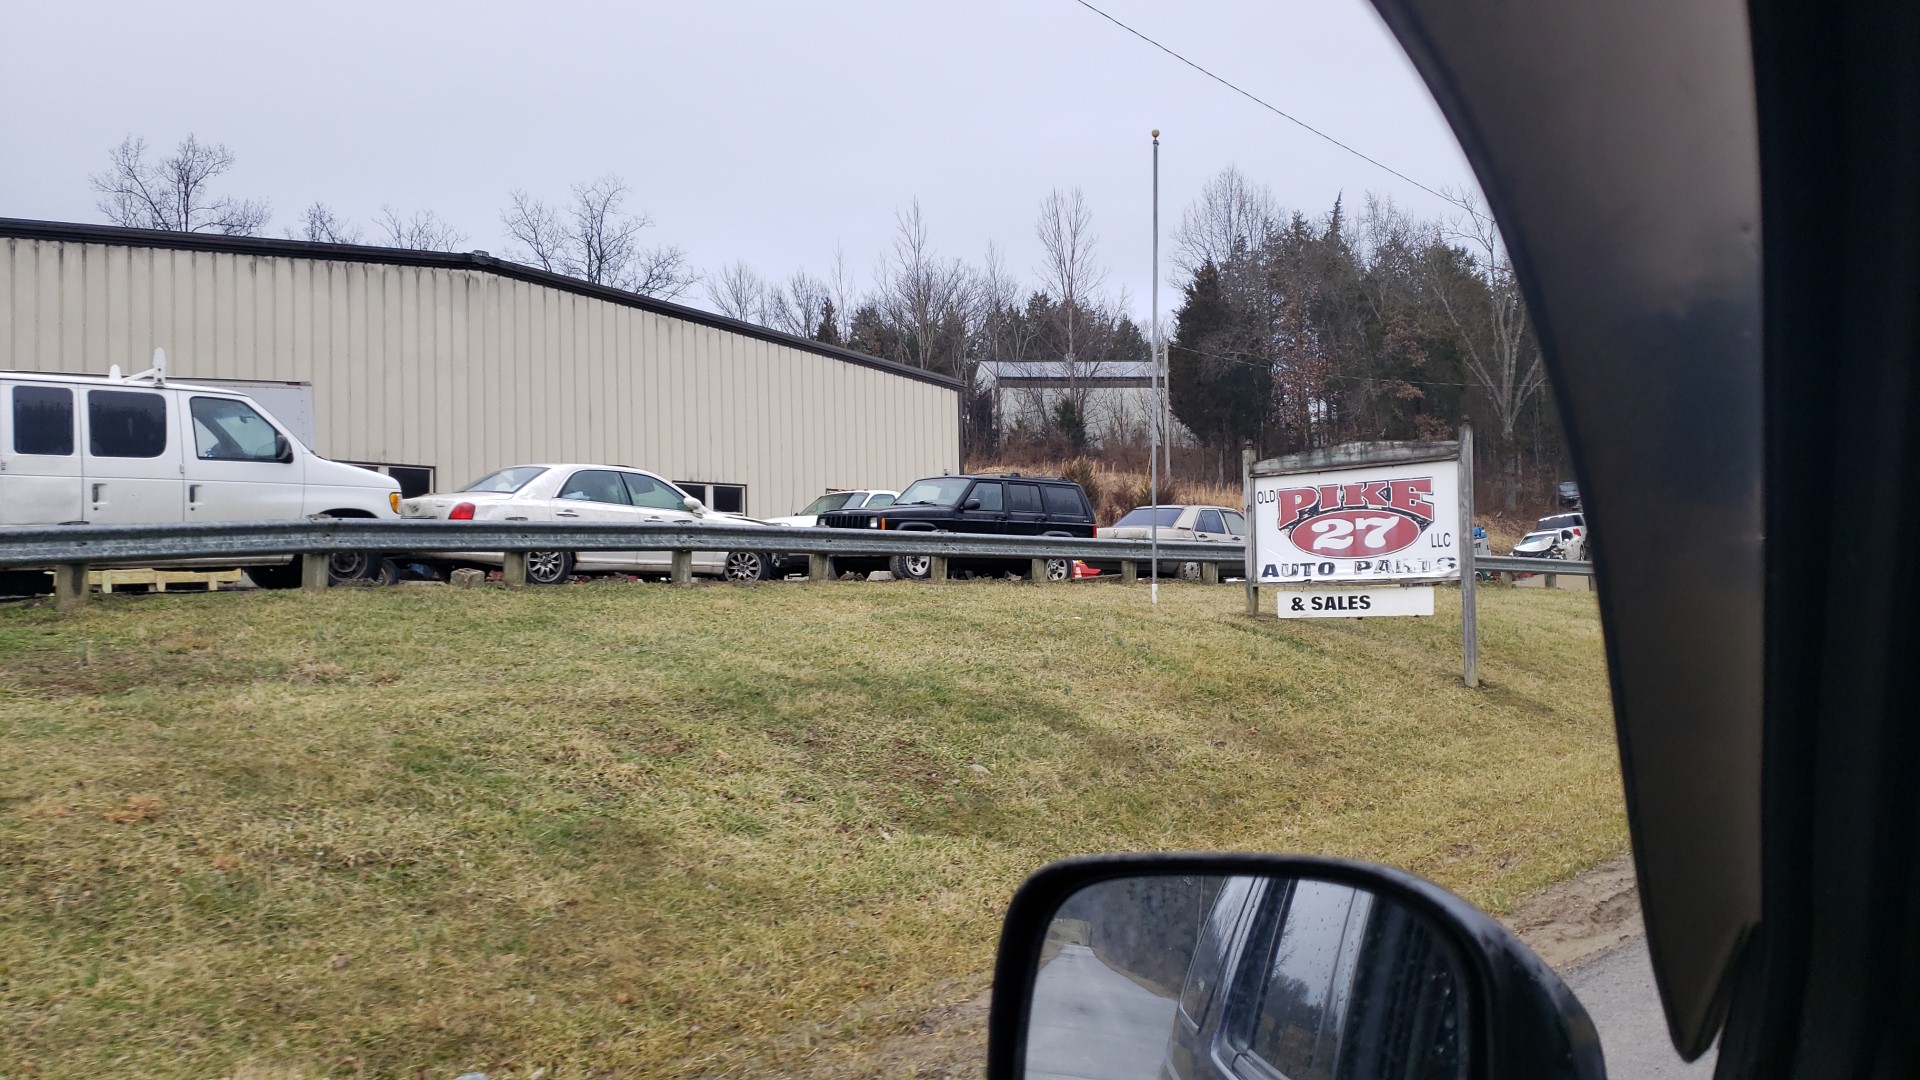 Old Pike 27 Auto Parts & Sales